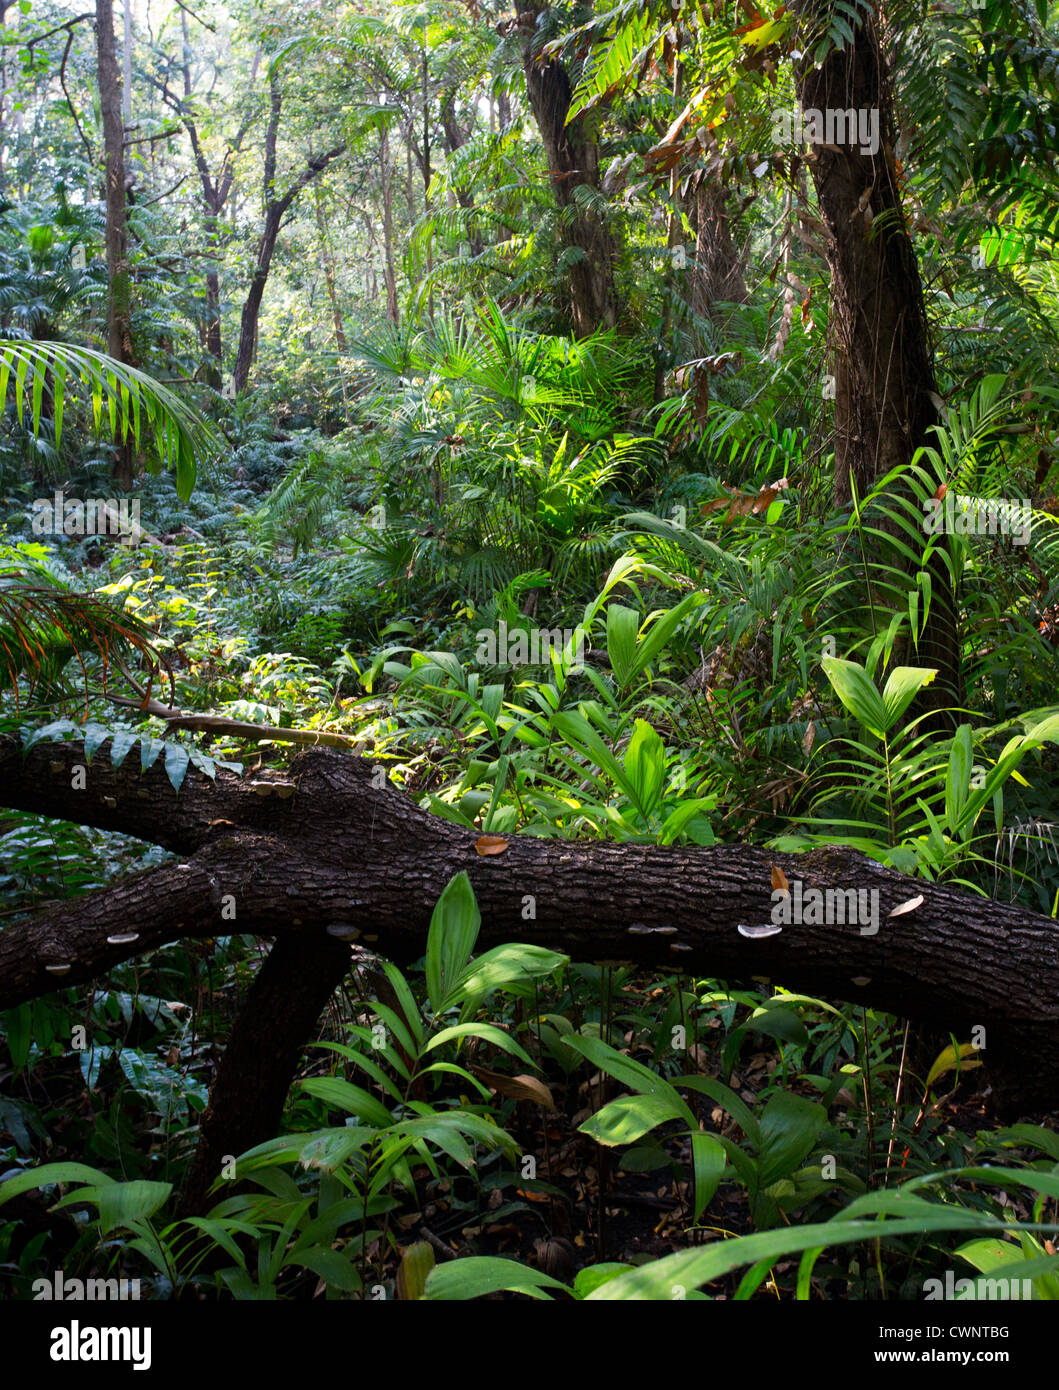 Palms and lush vegetation in tropical monsoon forest, Fogg Dam Conservation Area, Northern Territory, Australia Stock Photo